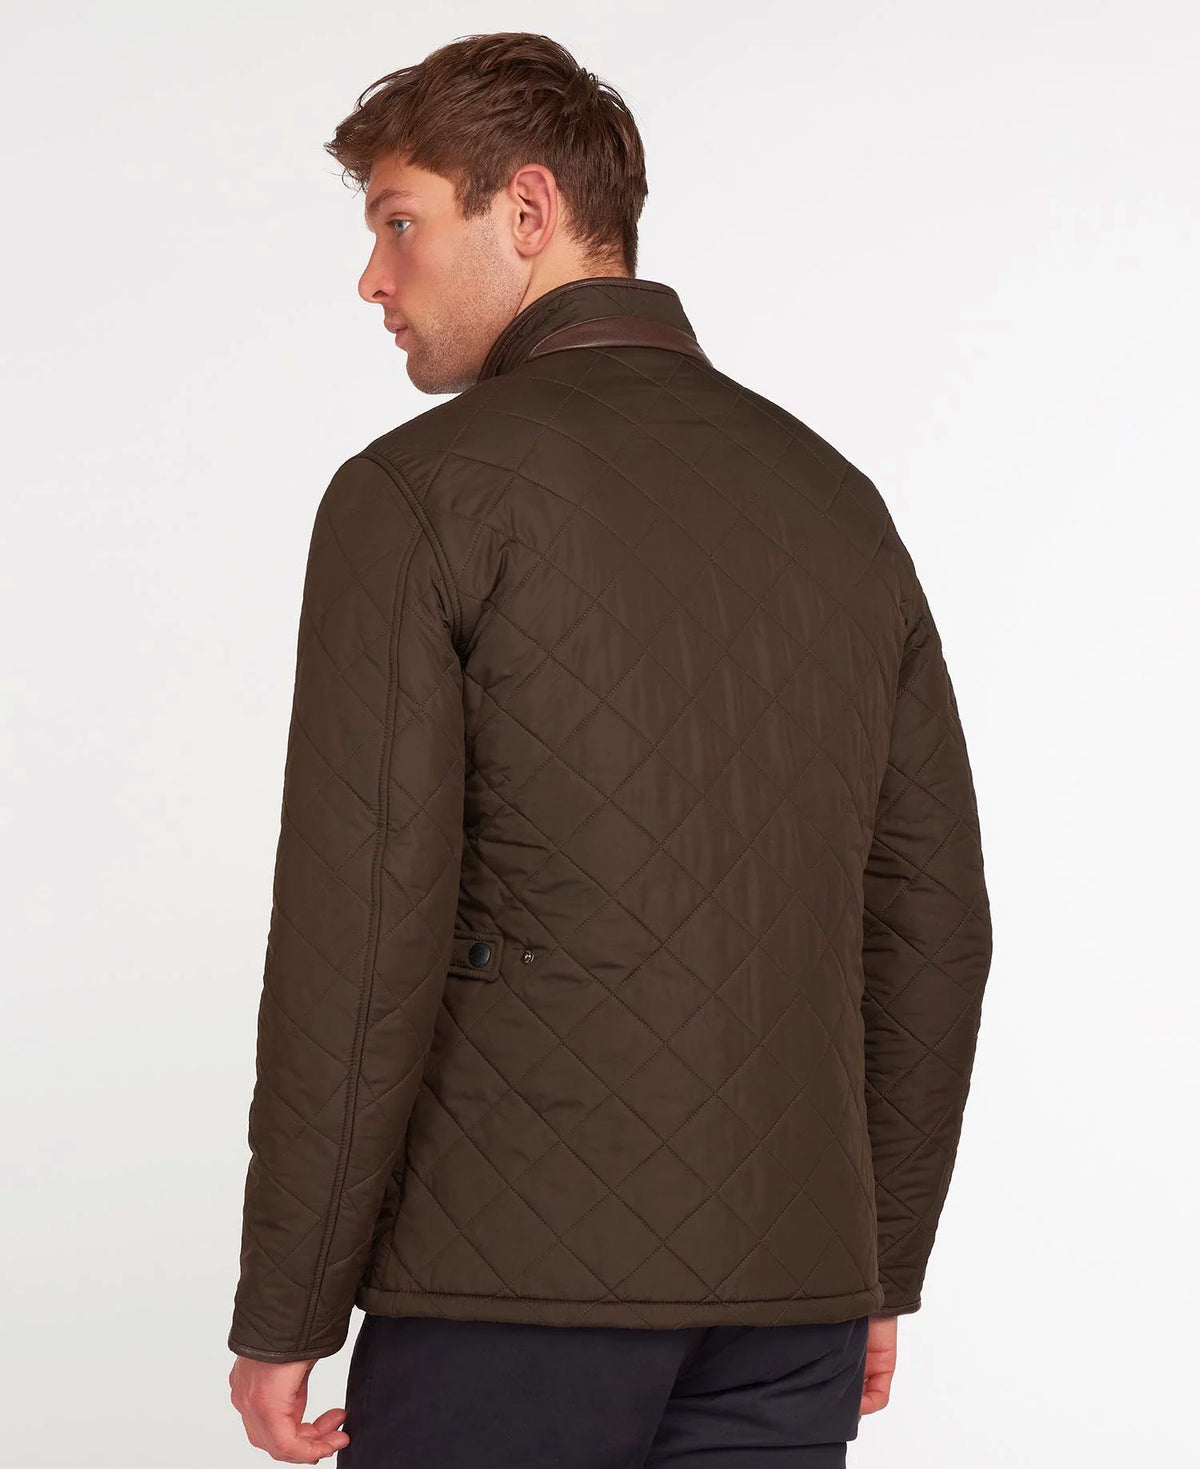 Barbour Mens Powell Quilted Chelsea Jacket, 02, Mqu0281, Olive